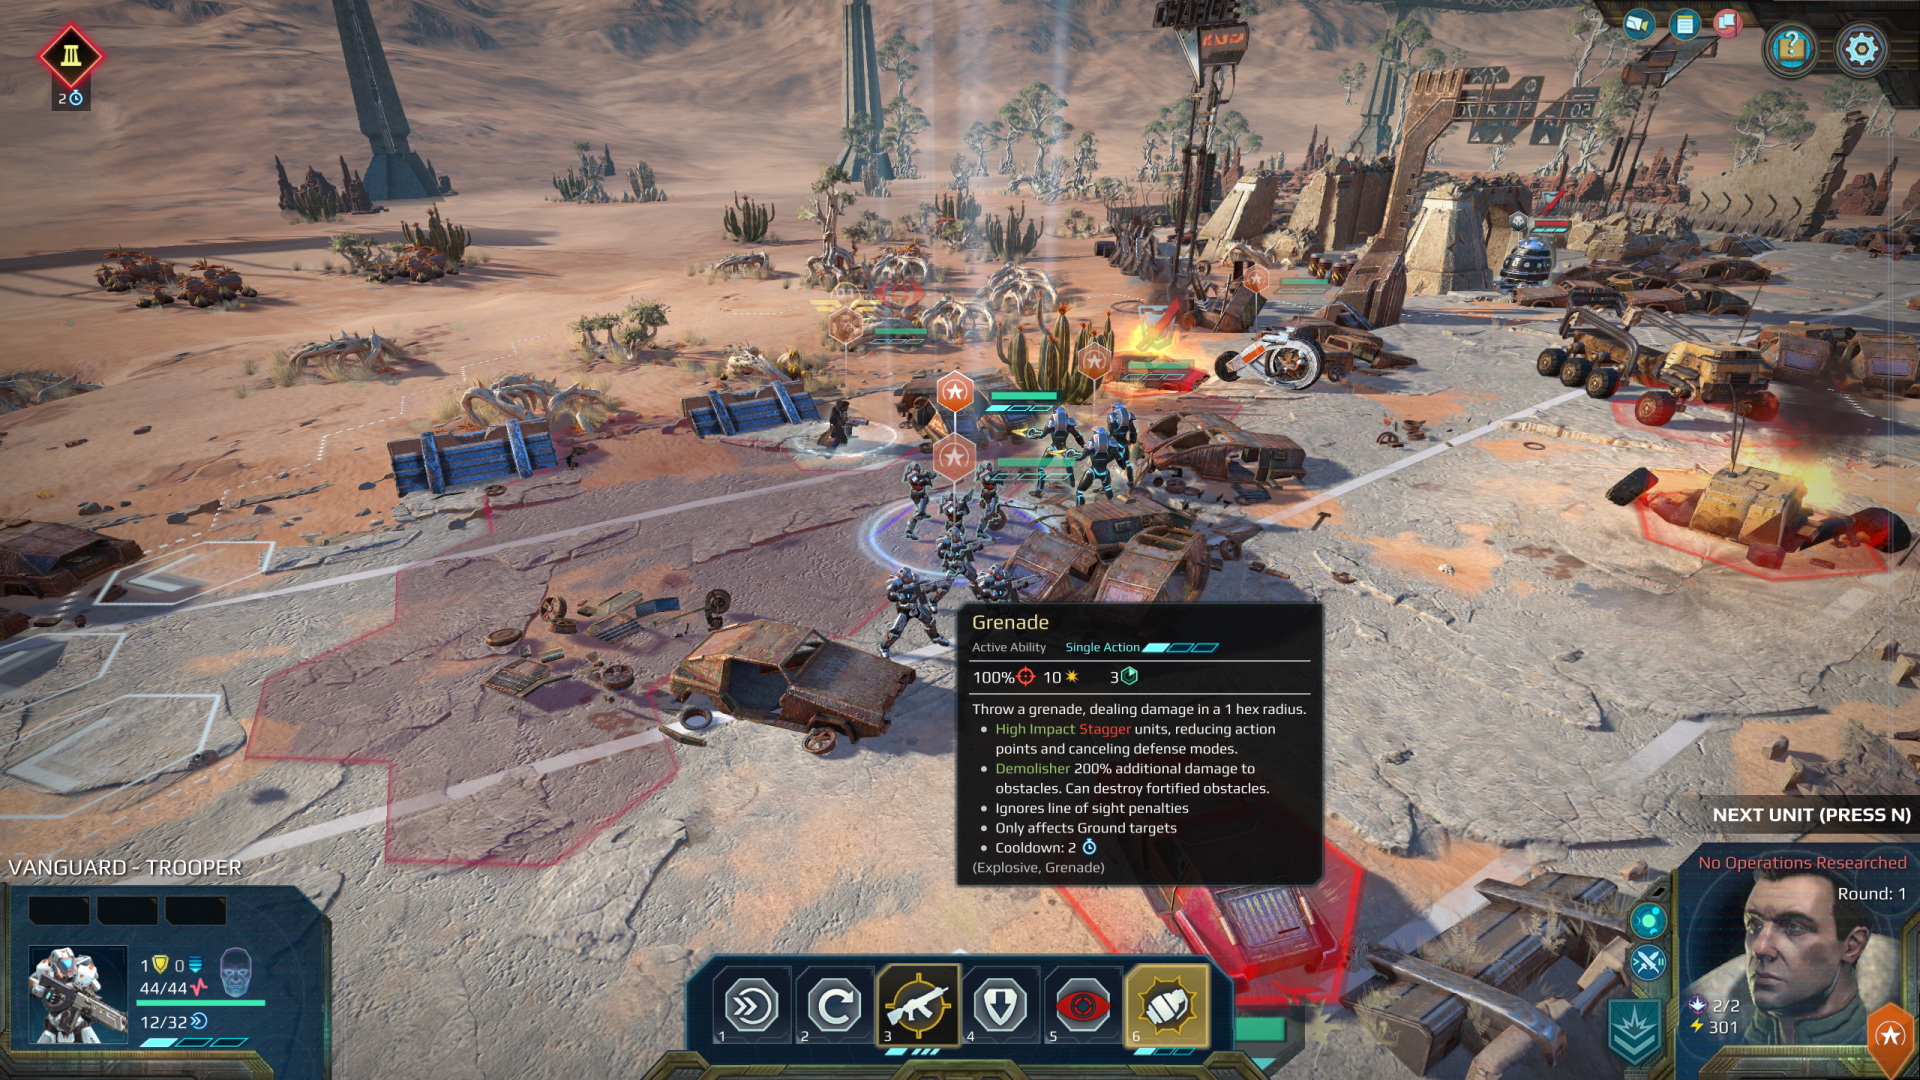 Age of Wonders: Planetfall - PS4 - Compra jogos online na